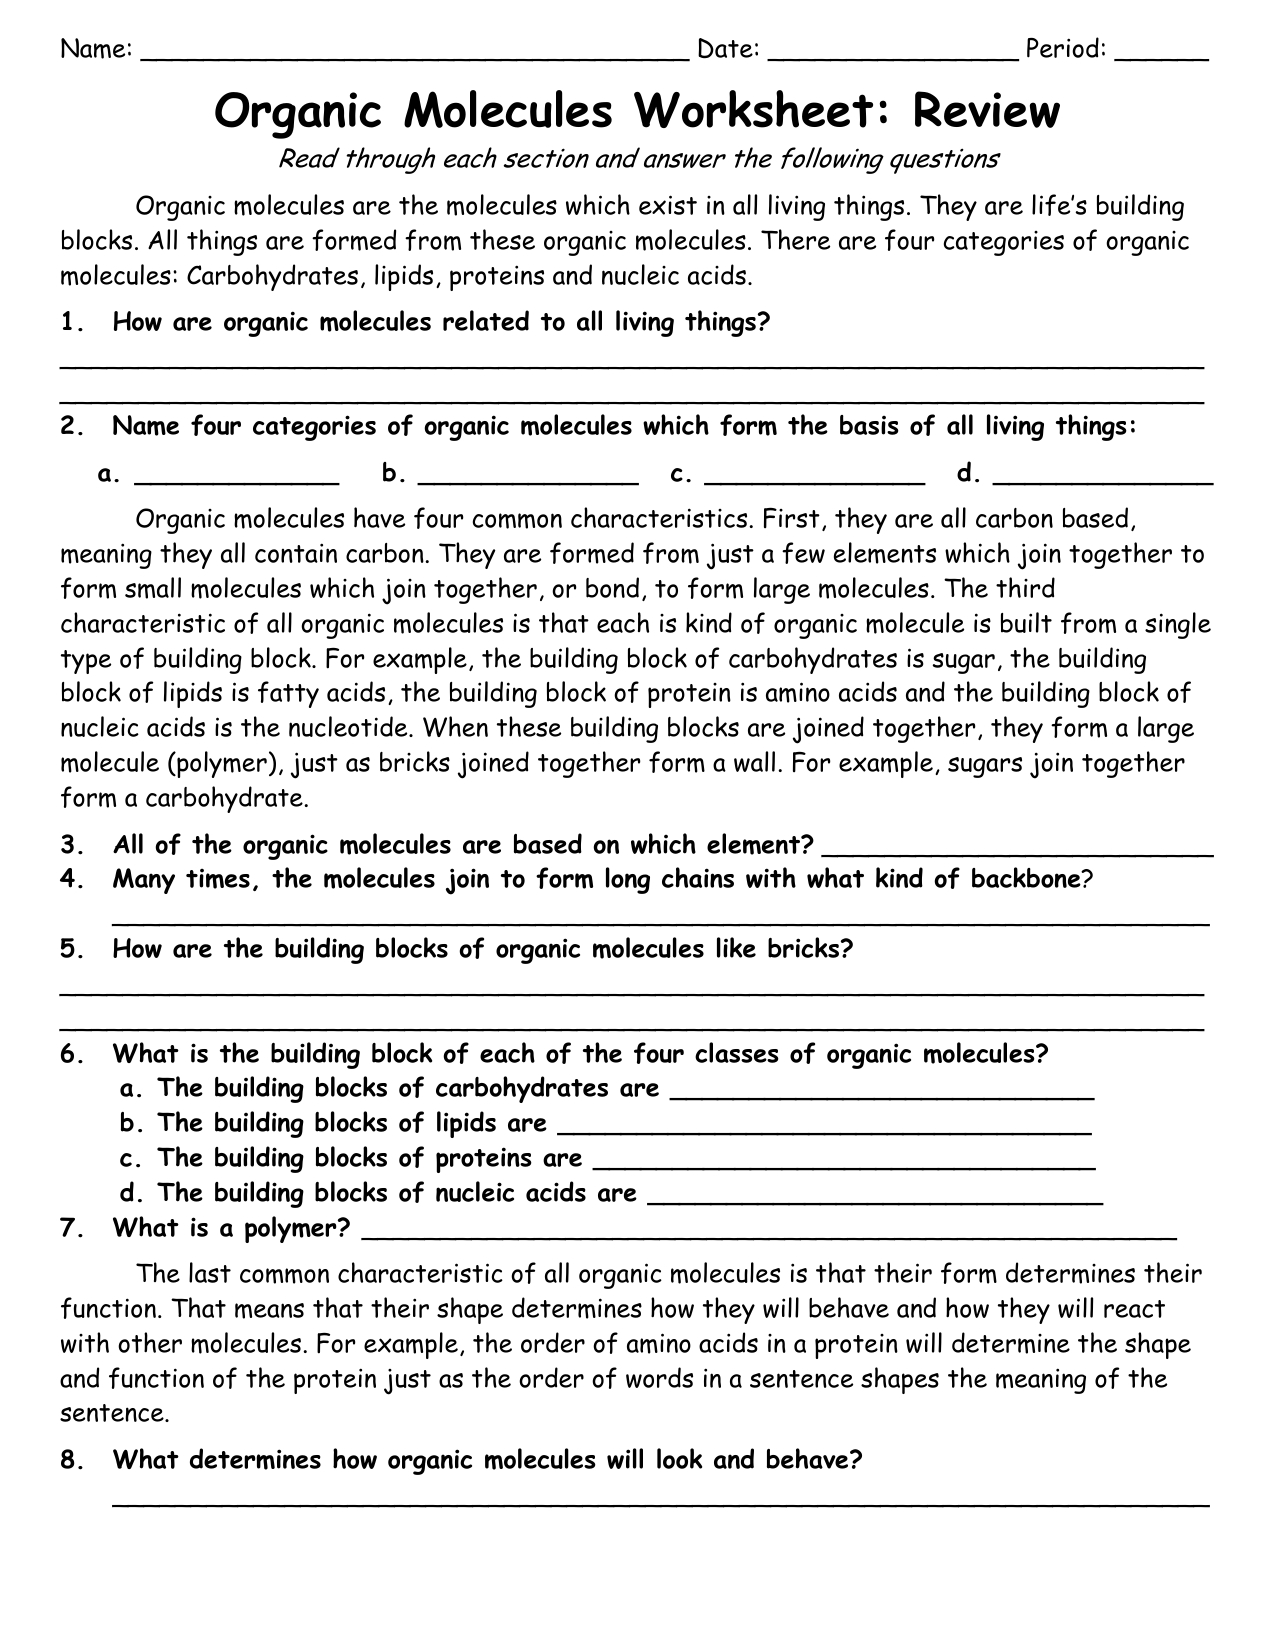 Organic Molecules Worksheet Review Together With Organic Molecules Worksheet Review